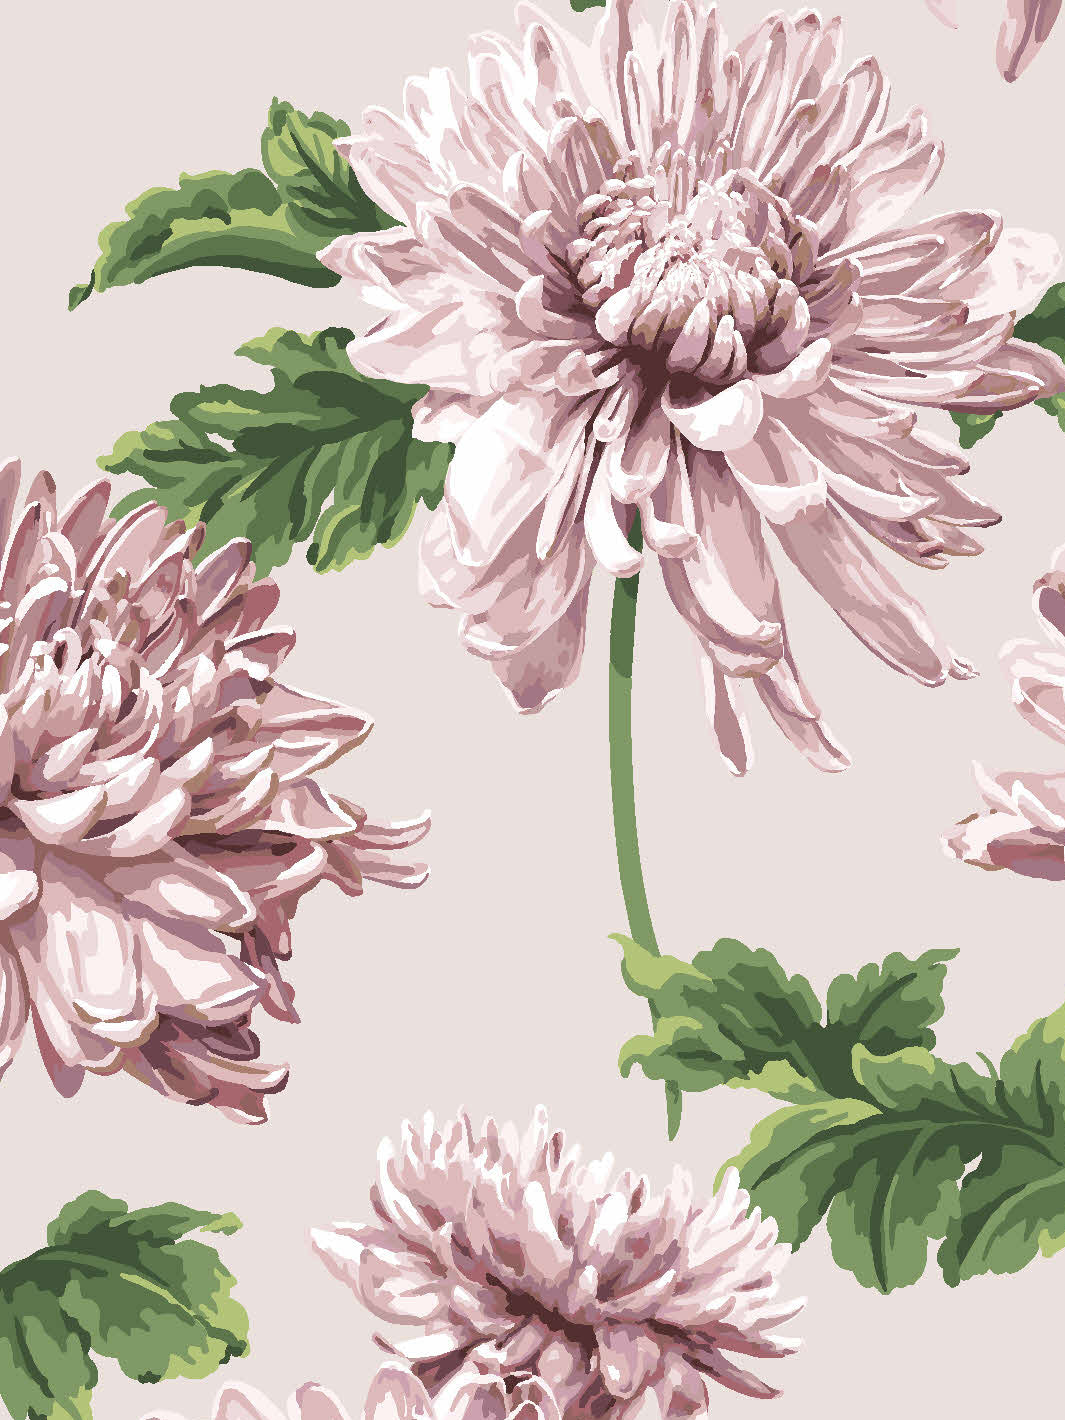 'Mums for Marion Small' Wallpaper by Sarah Jessica Parker - Oyster